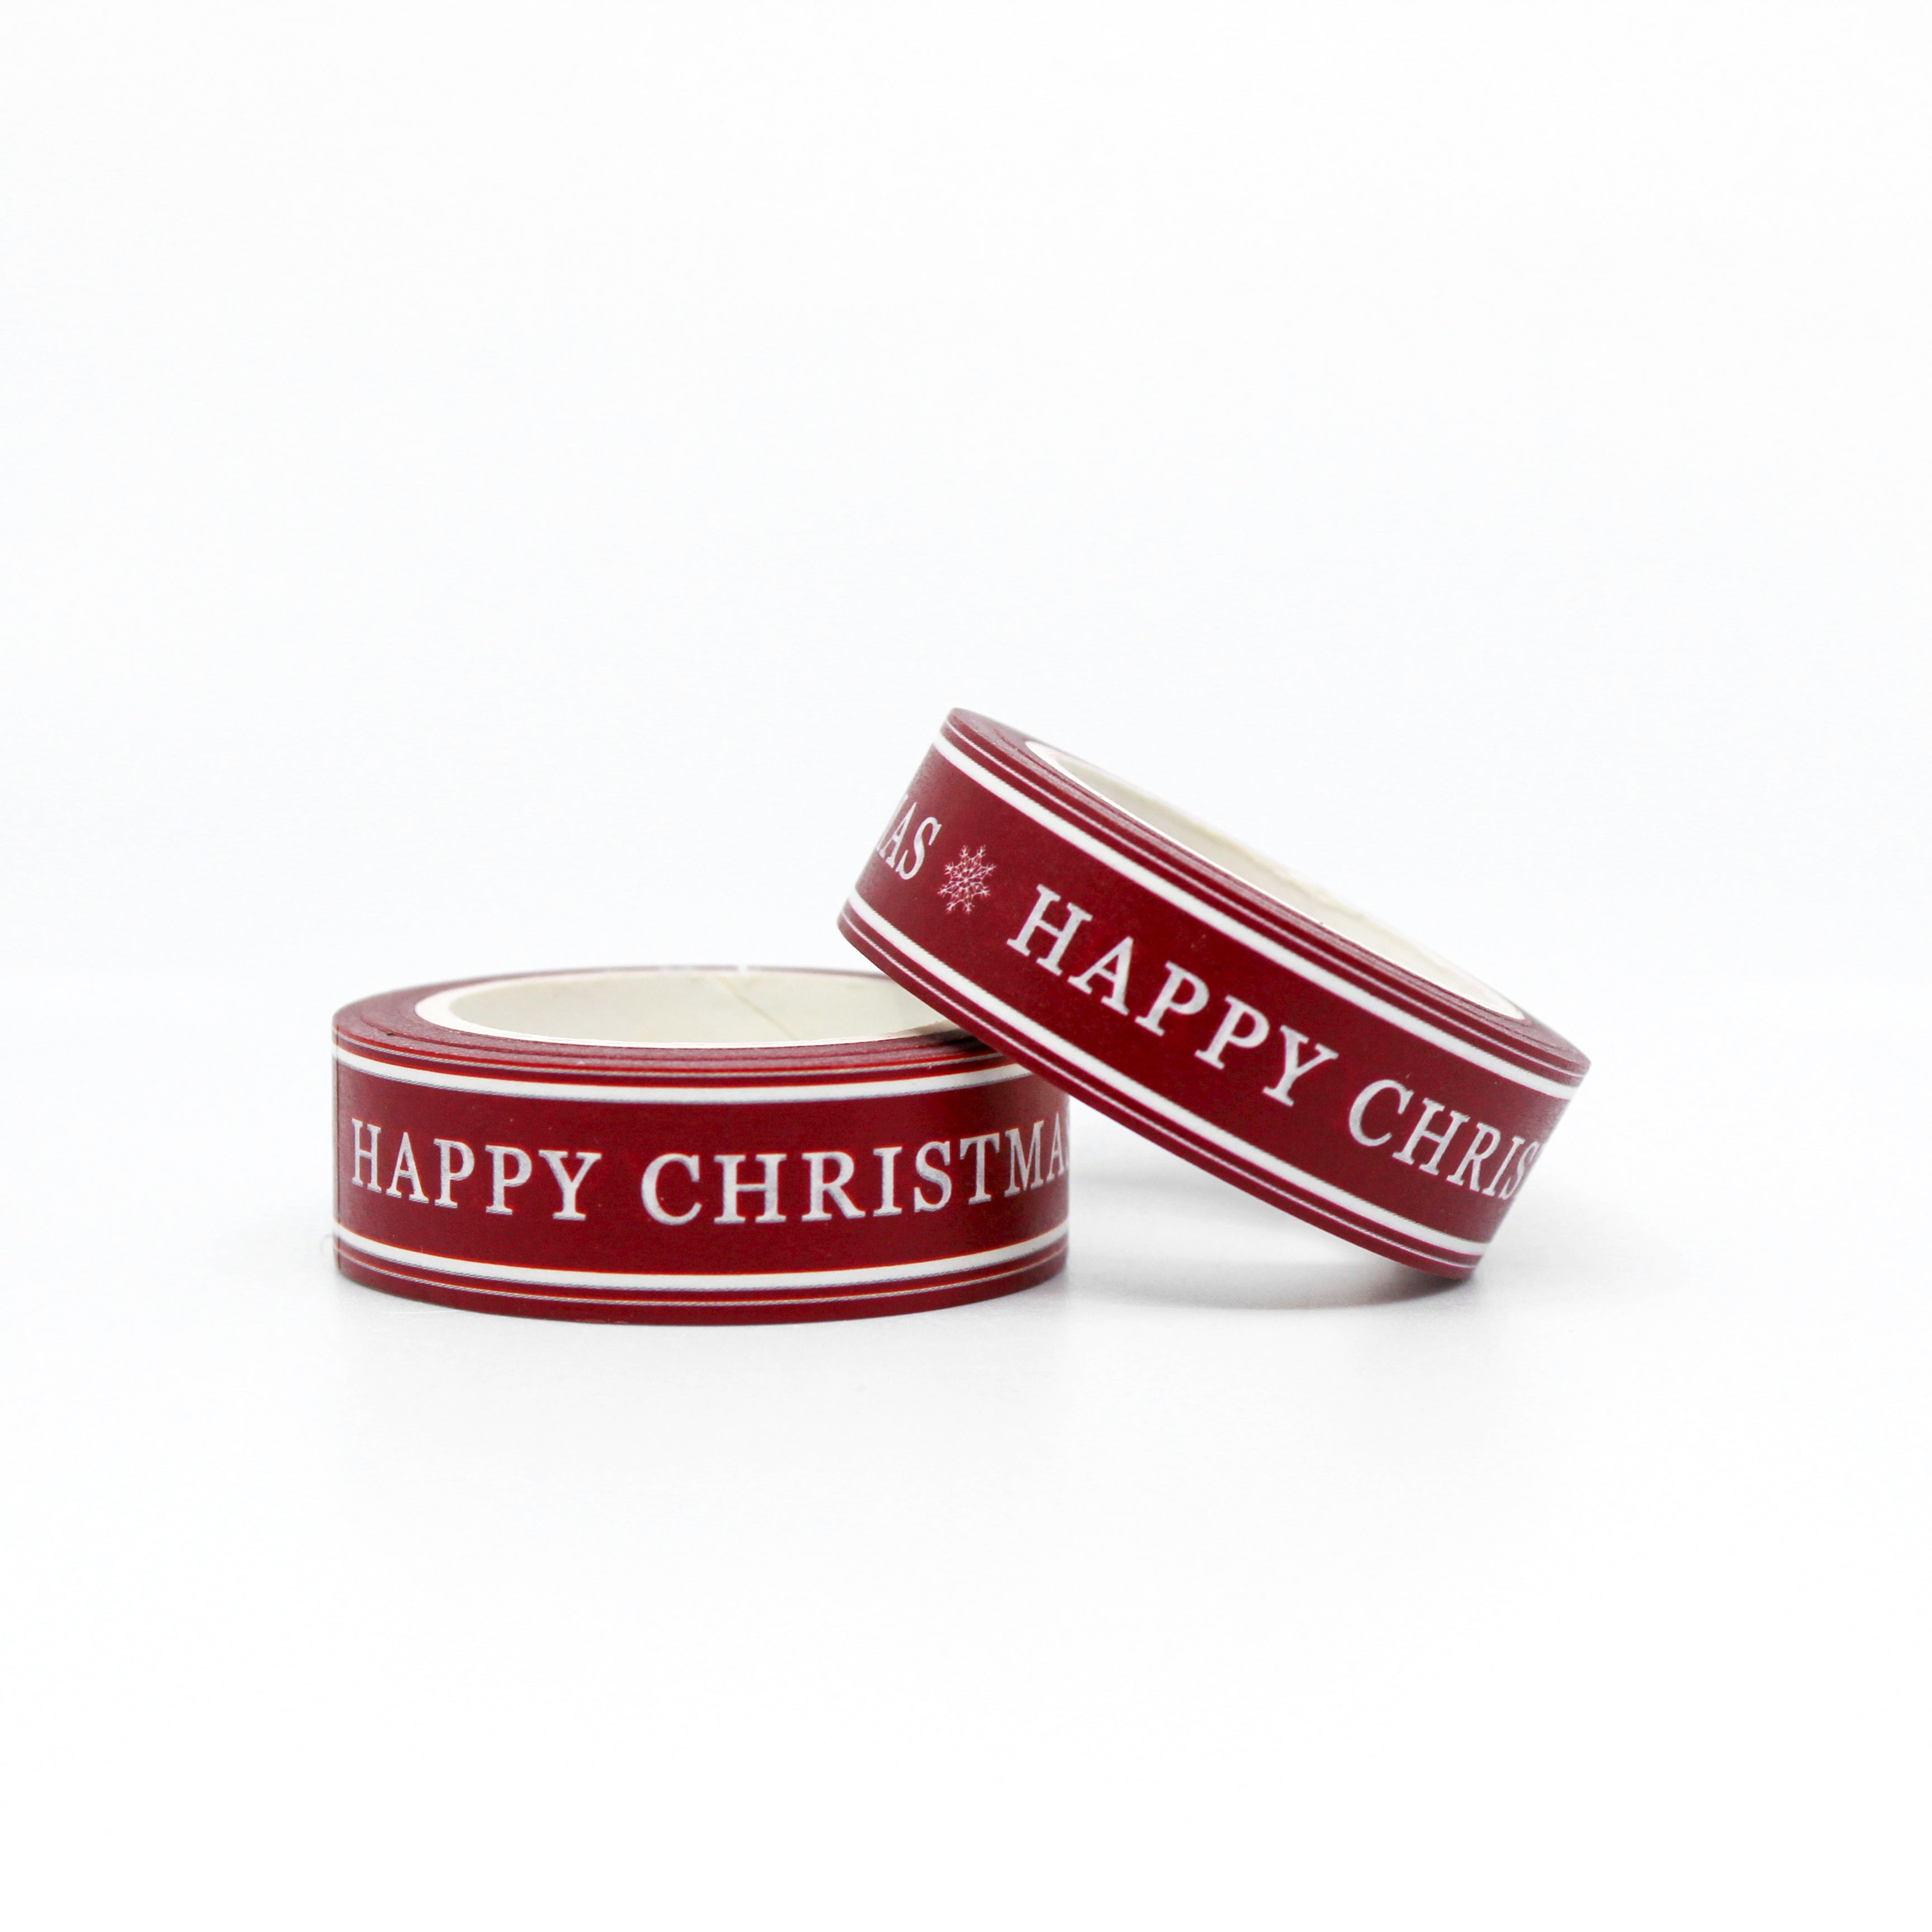 This is a roll of color red happy Christmas washi tapes from BBB Supplies Craft Shop